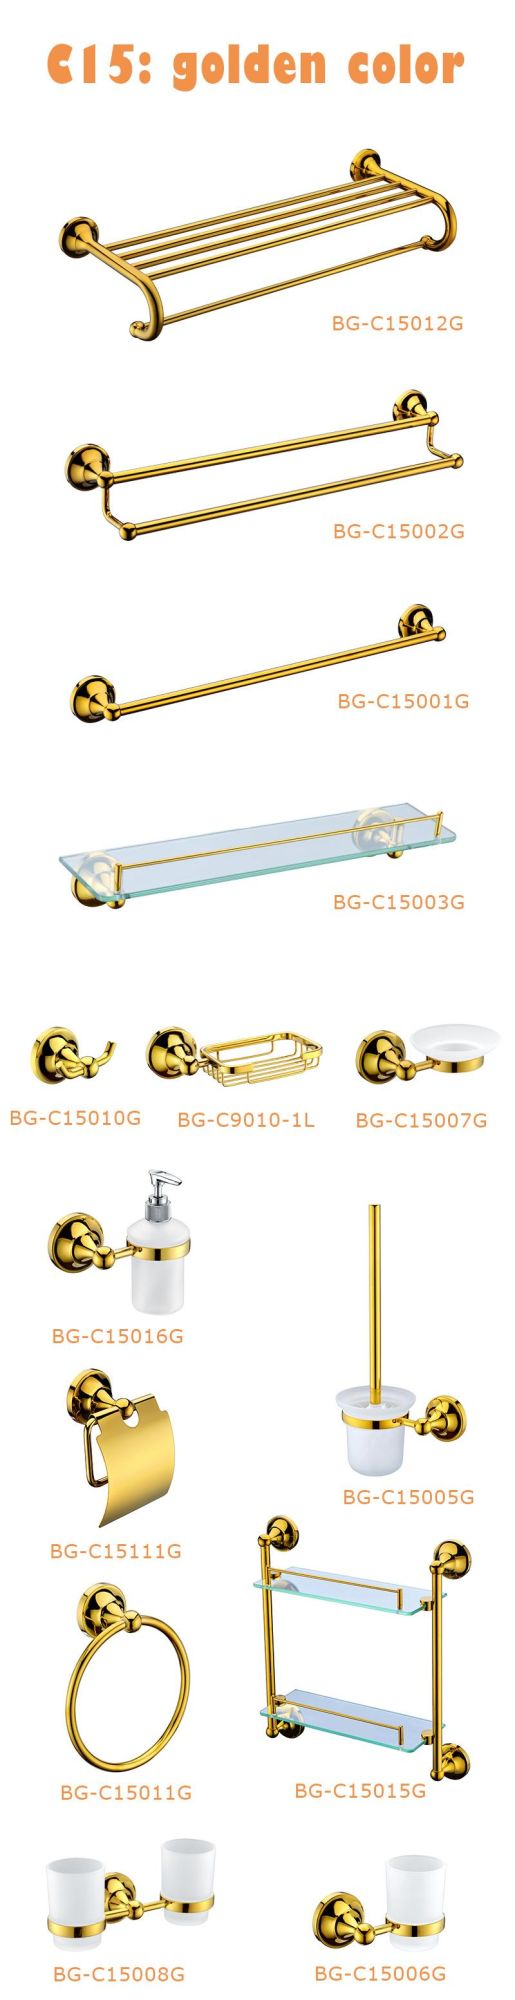 Classical Golden Color Towel Ring in Ss201 (BG-C15011G)